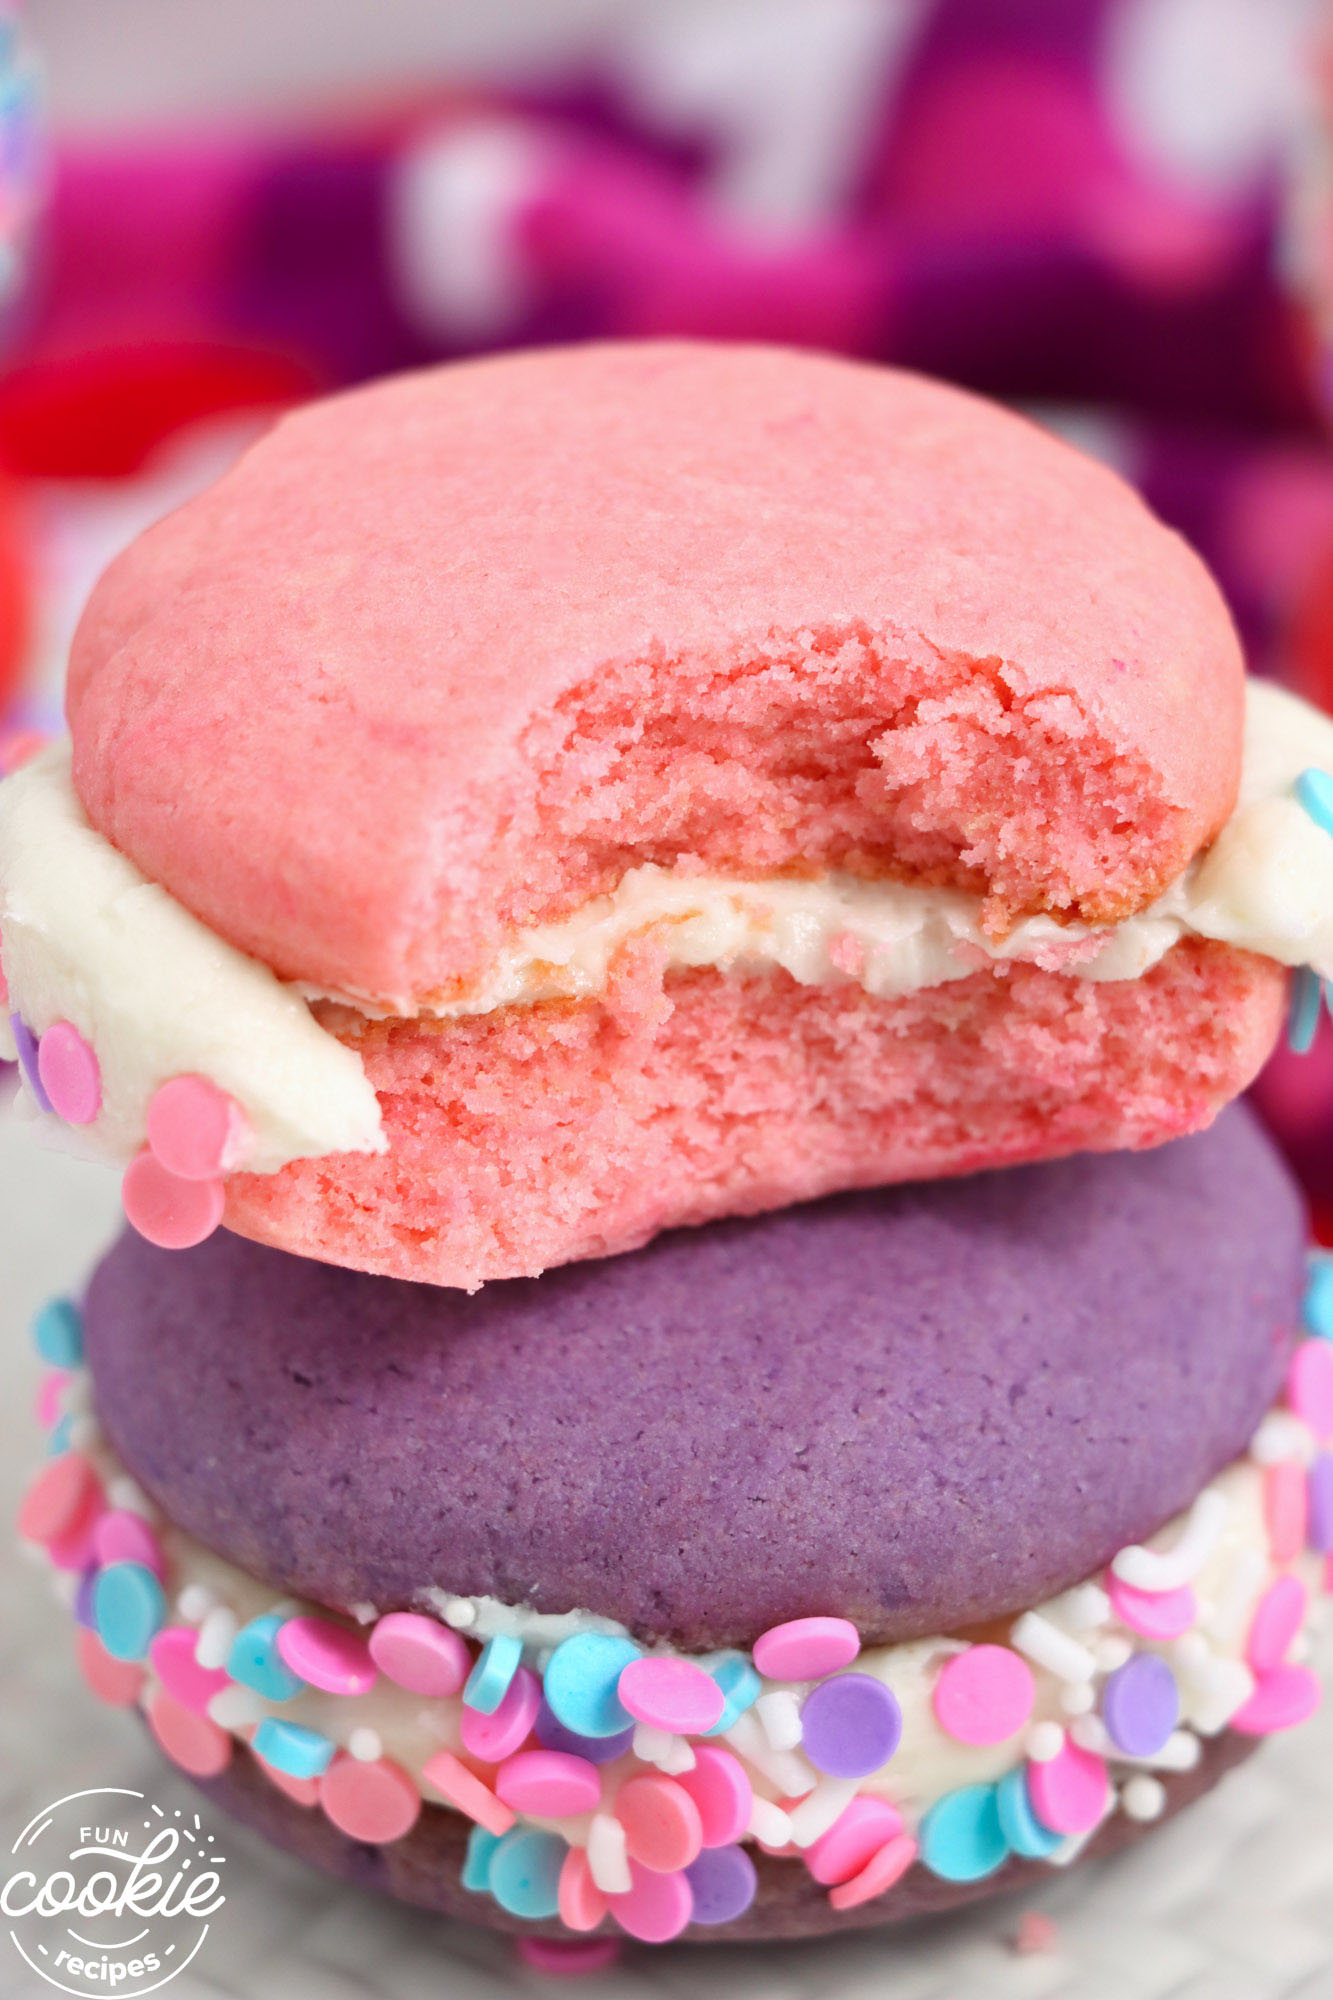 a pink whoopie pie on top of a p urple one. The cookies are filled with vanilla frosting and have sprinkles around the edges.